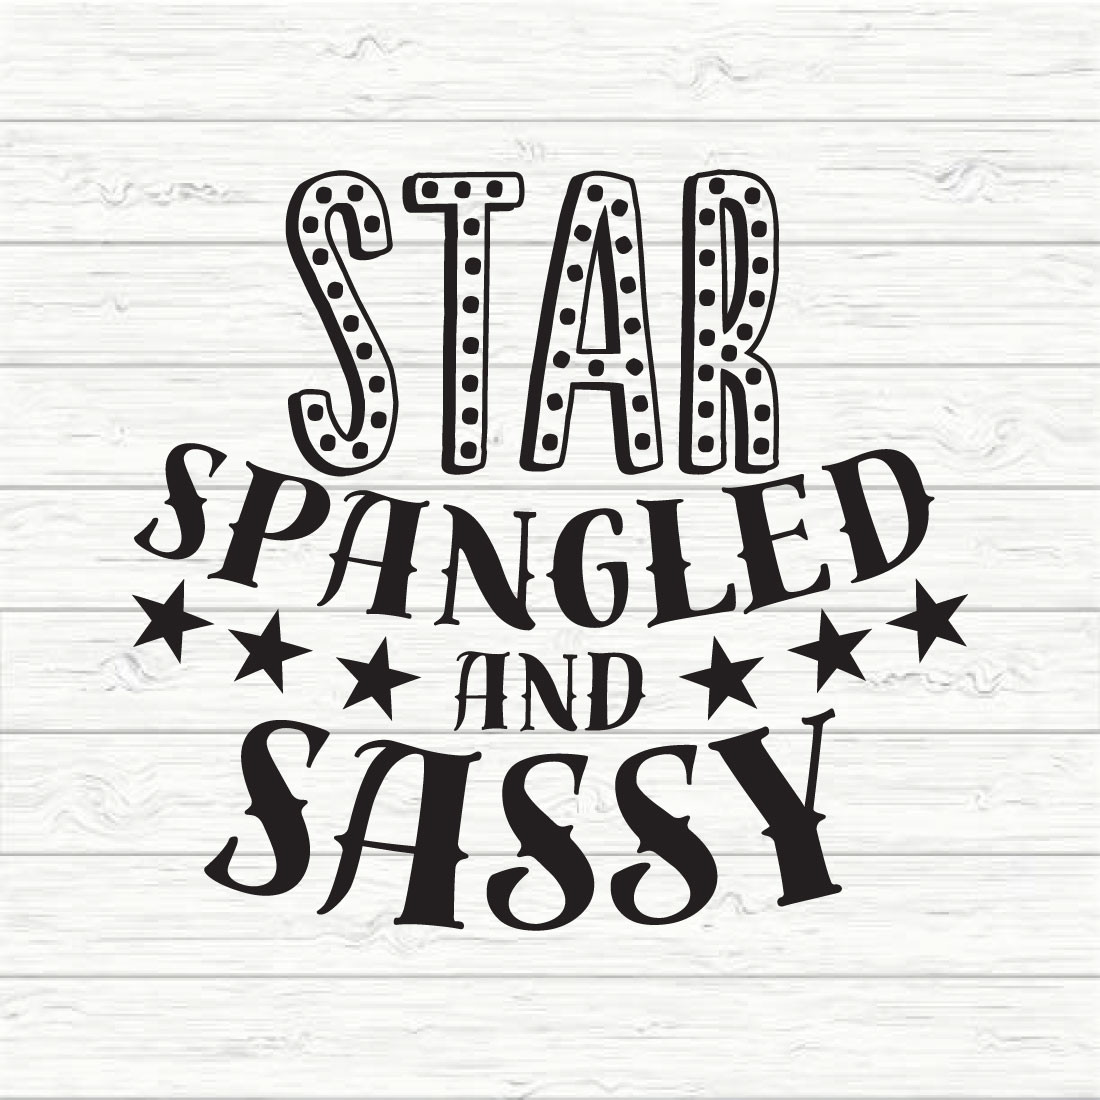 Star Spangled and Sassy preview image.